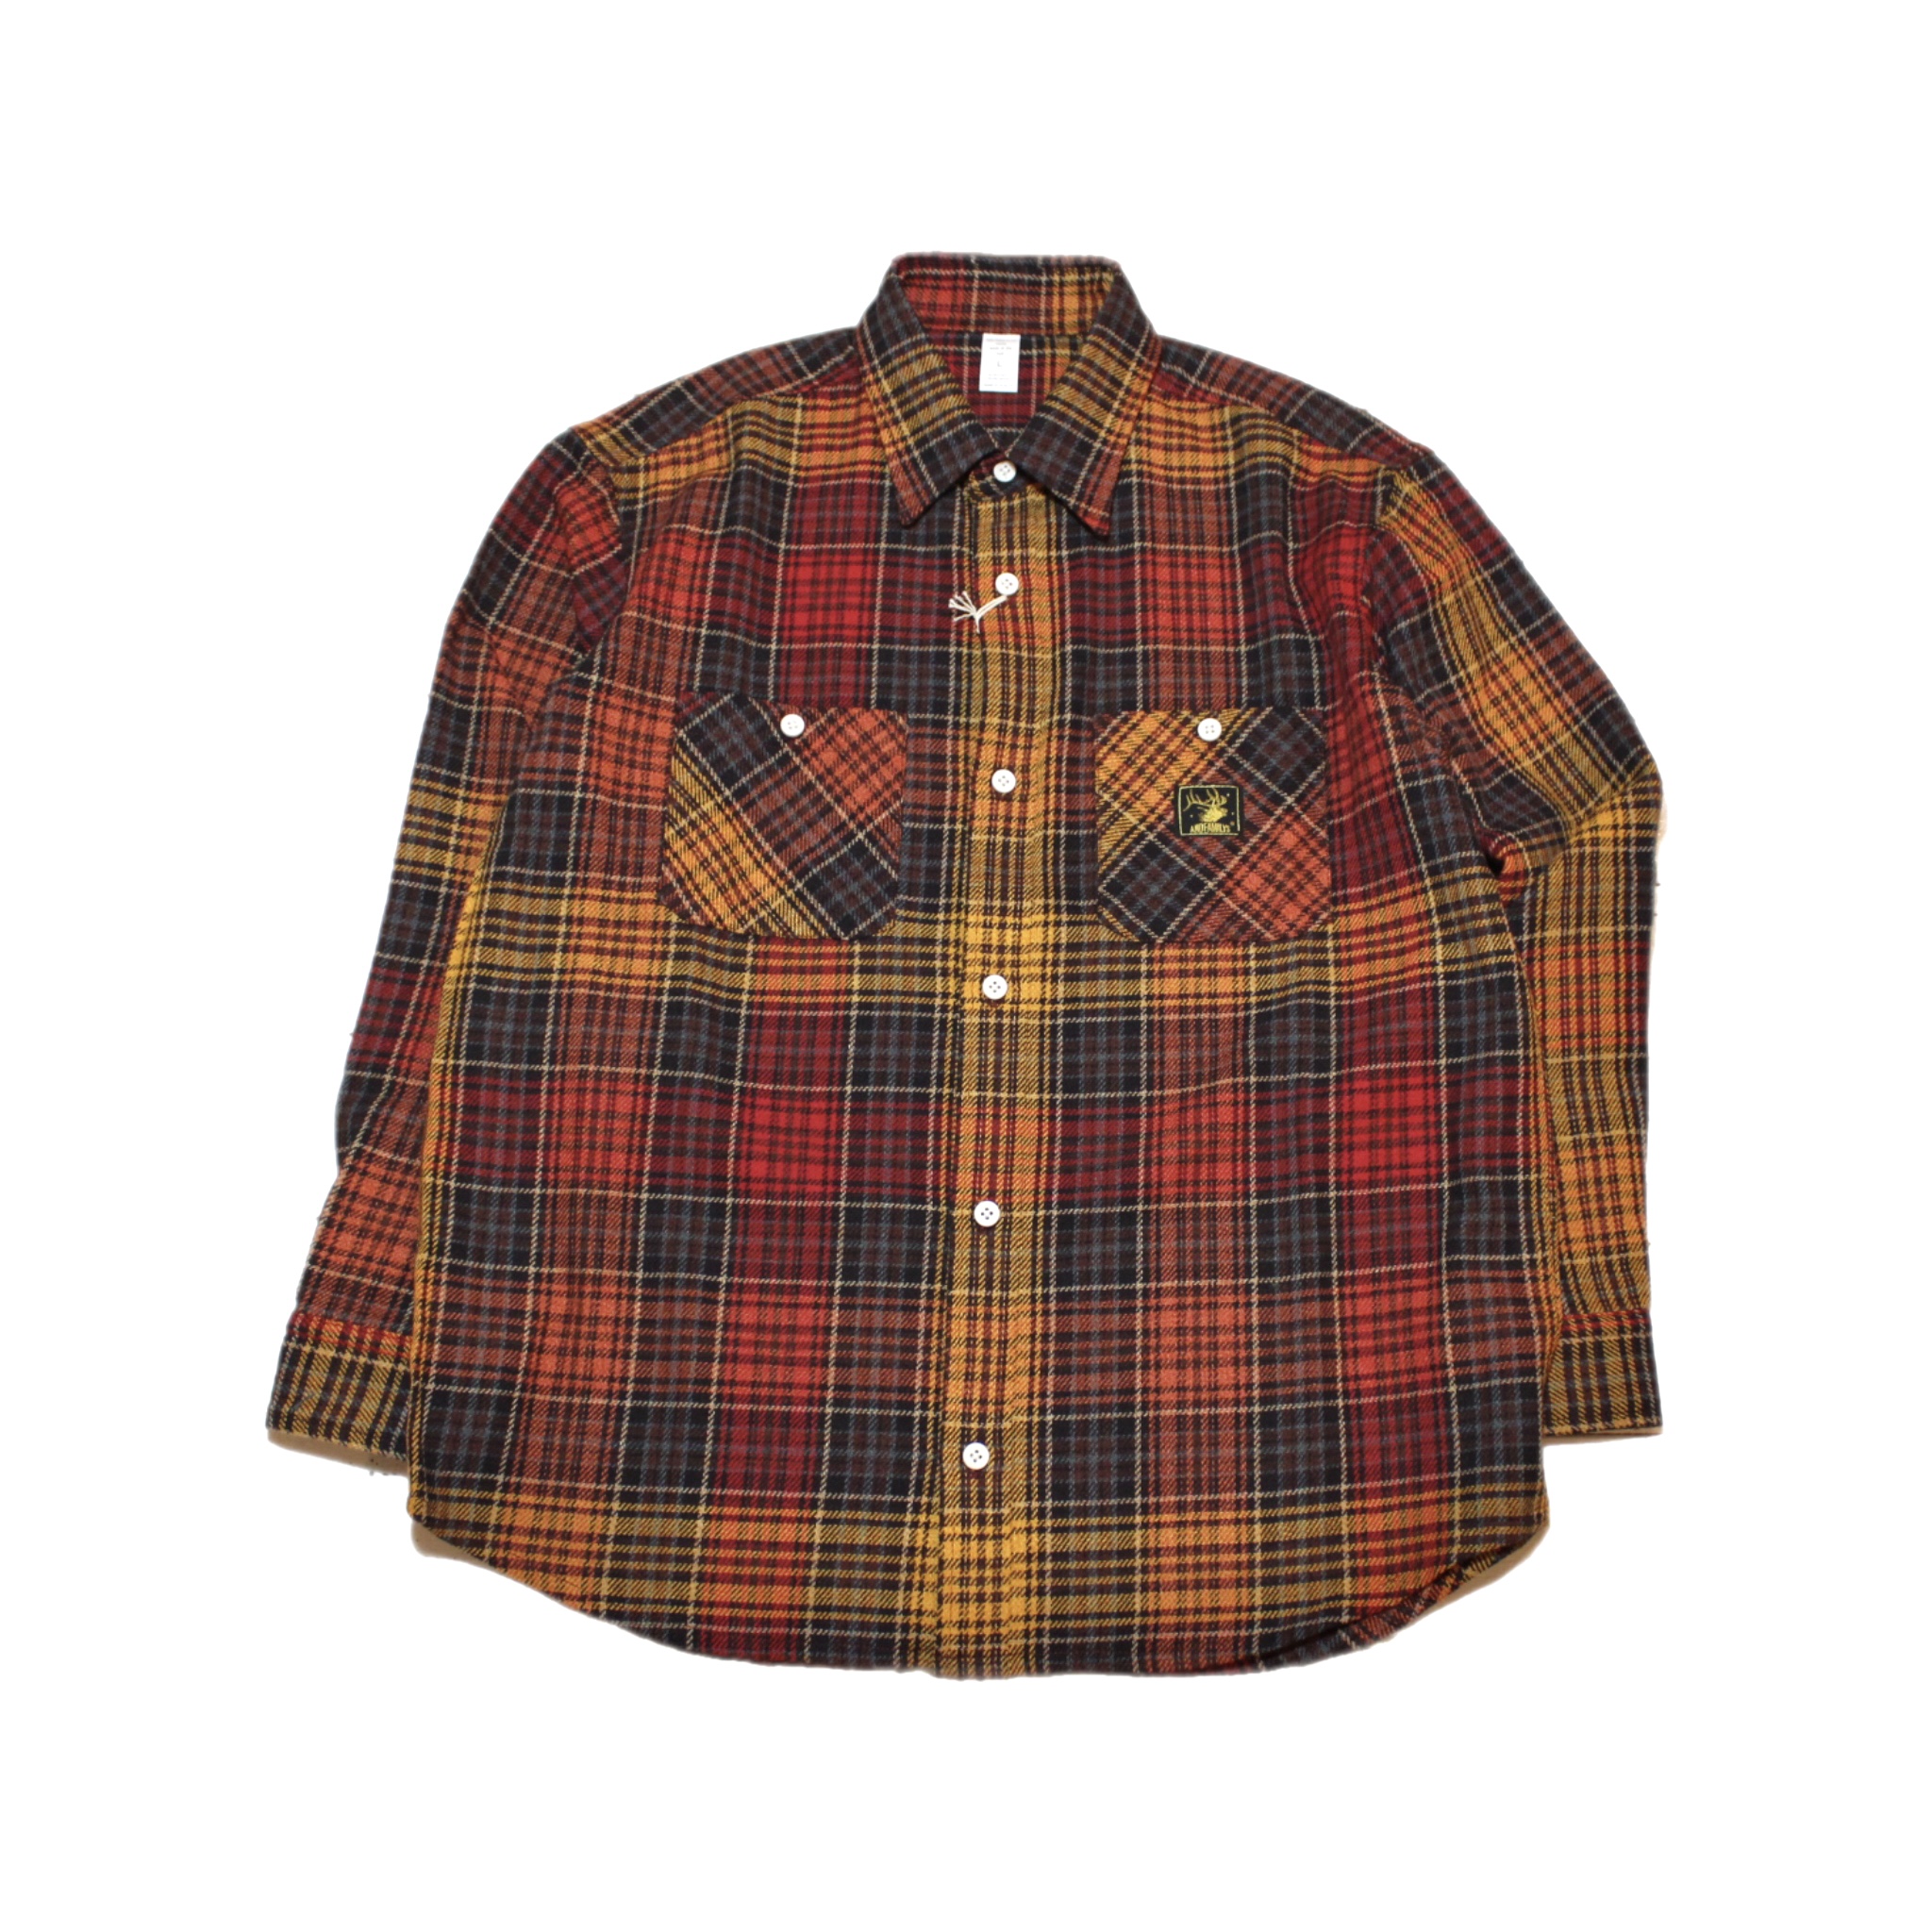 ANDFAMILYS(アンドファミリーズ) / CLASSIC FLANNEL SHIRTS